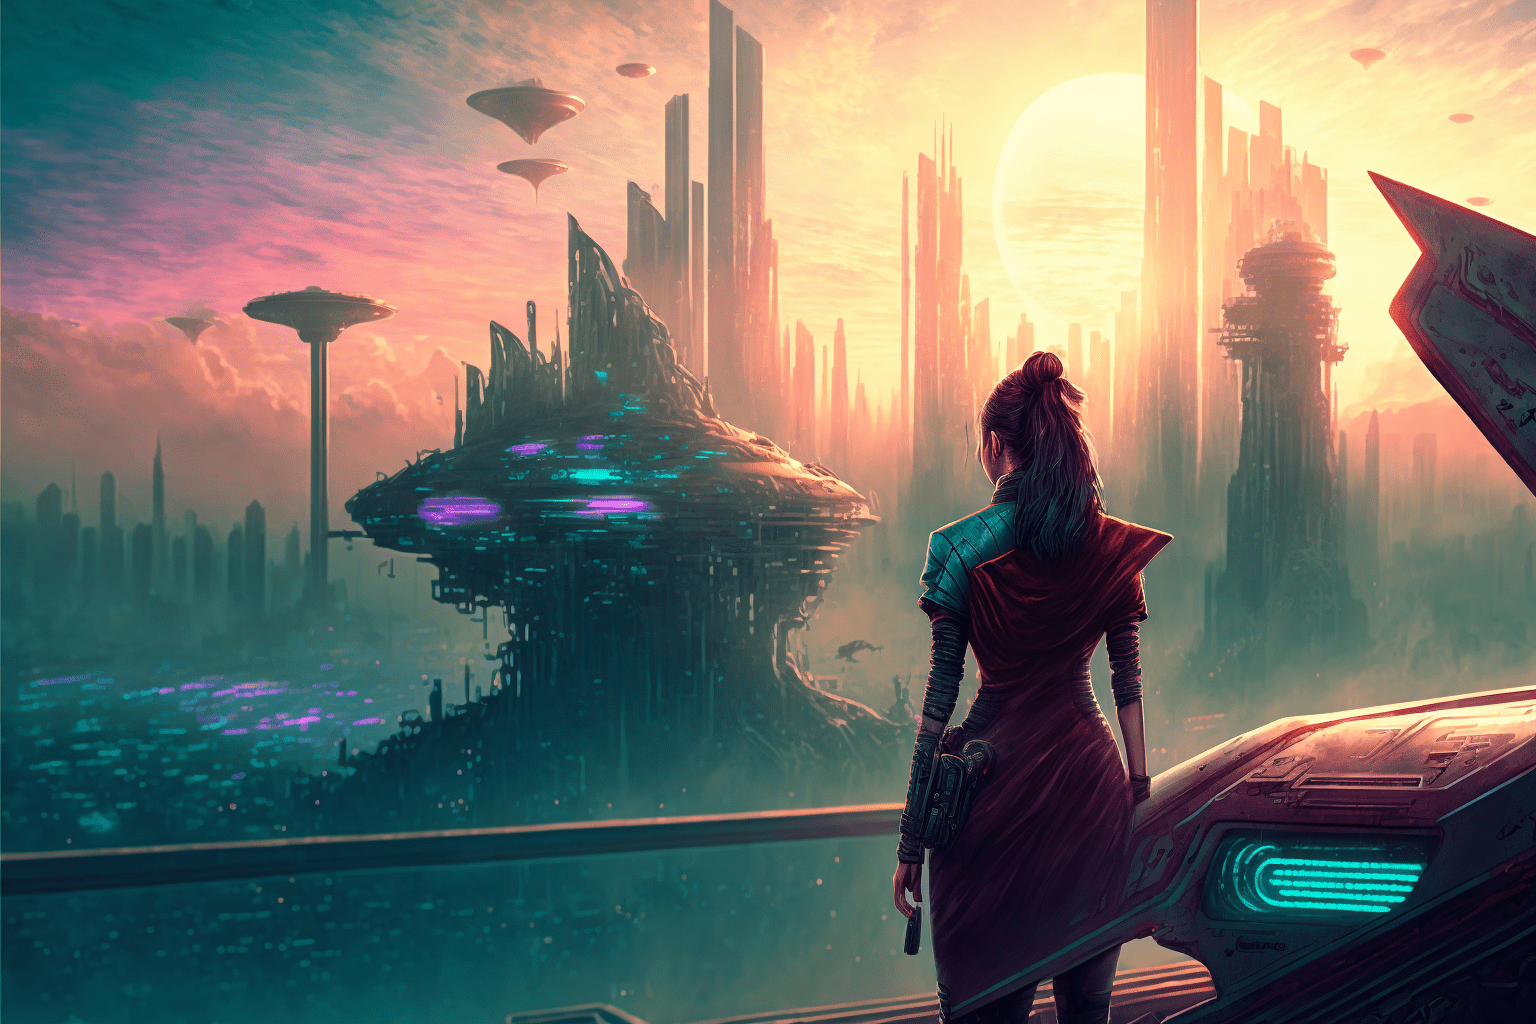 A woman in futuristic clothing looks out over a cityscape of tall buildings and flying spaceships. - Cyberpunk